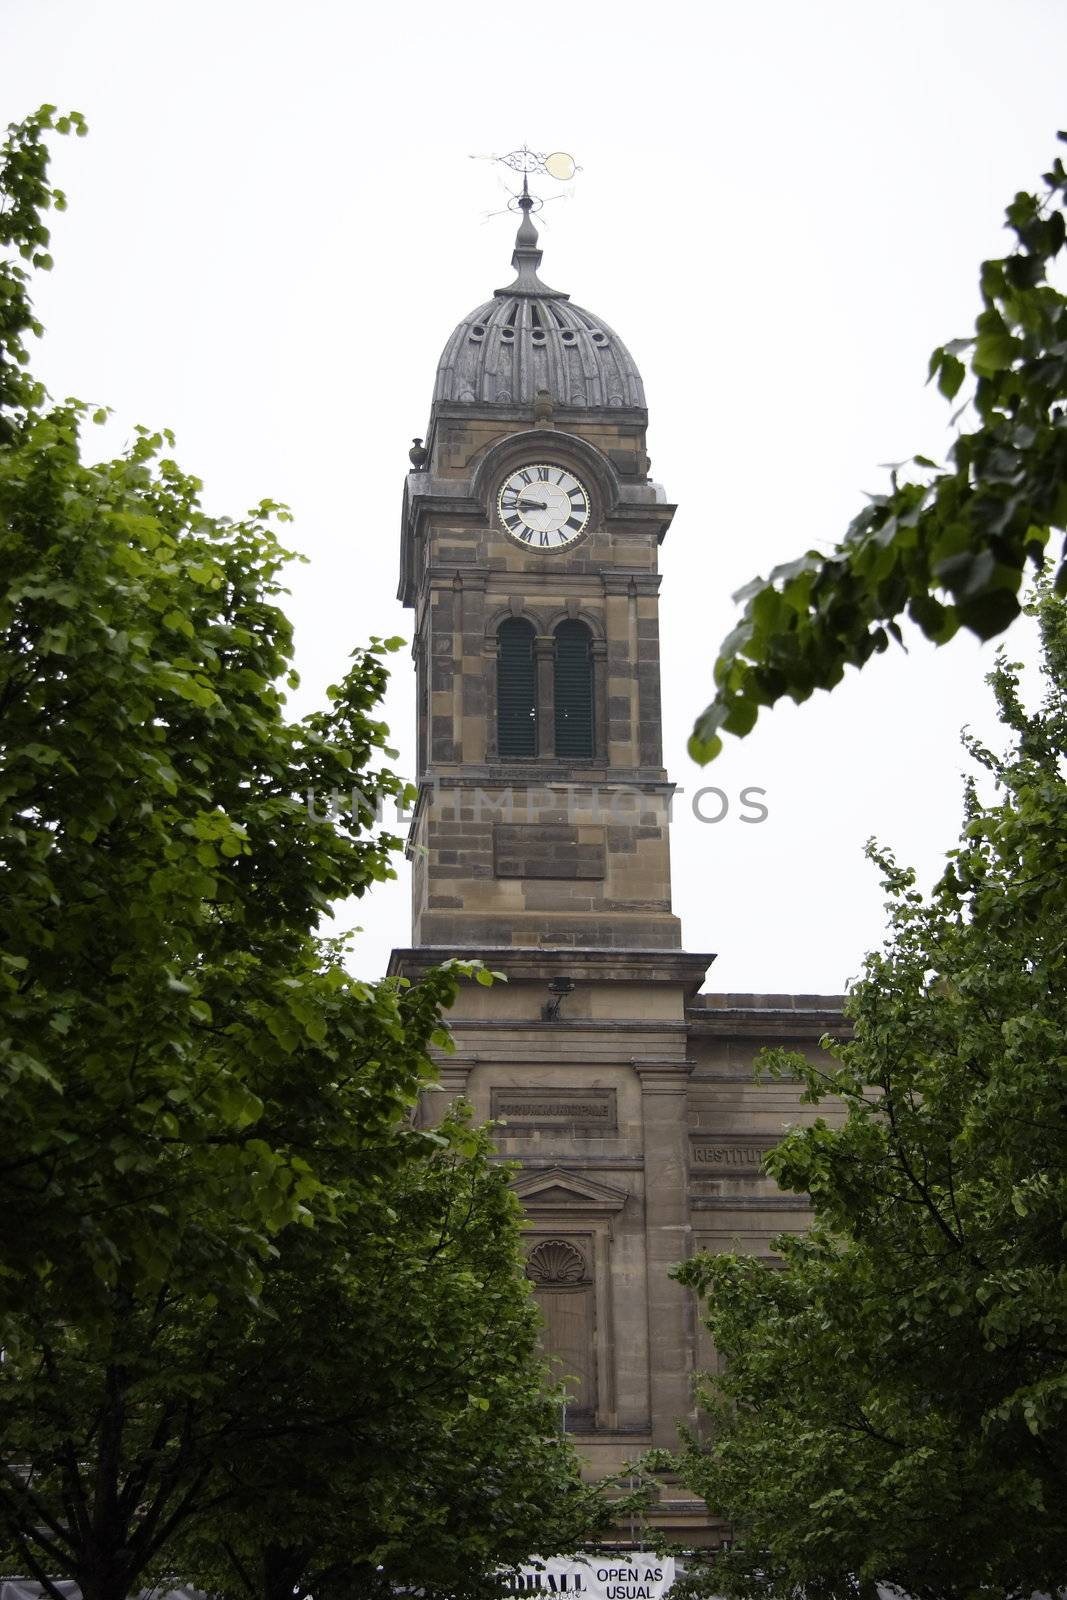 guildhall showing the clock and tower between trees